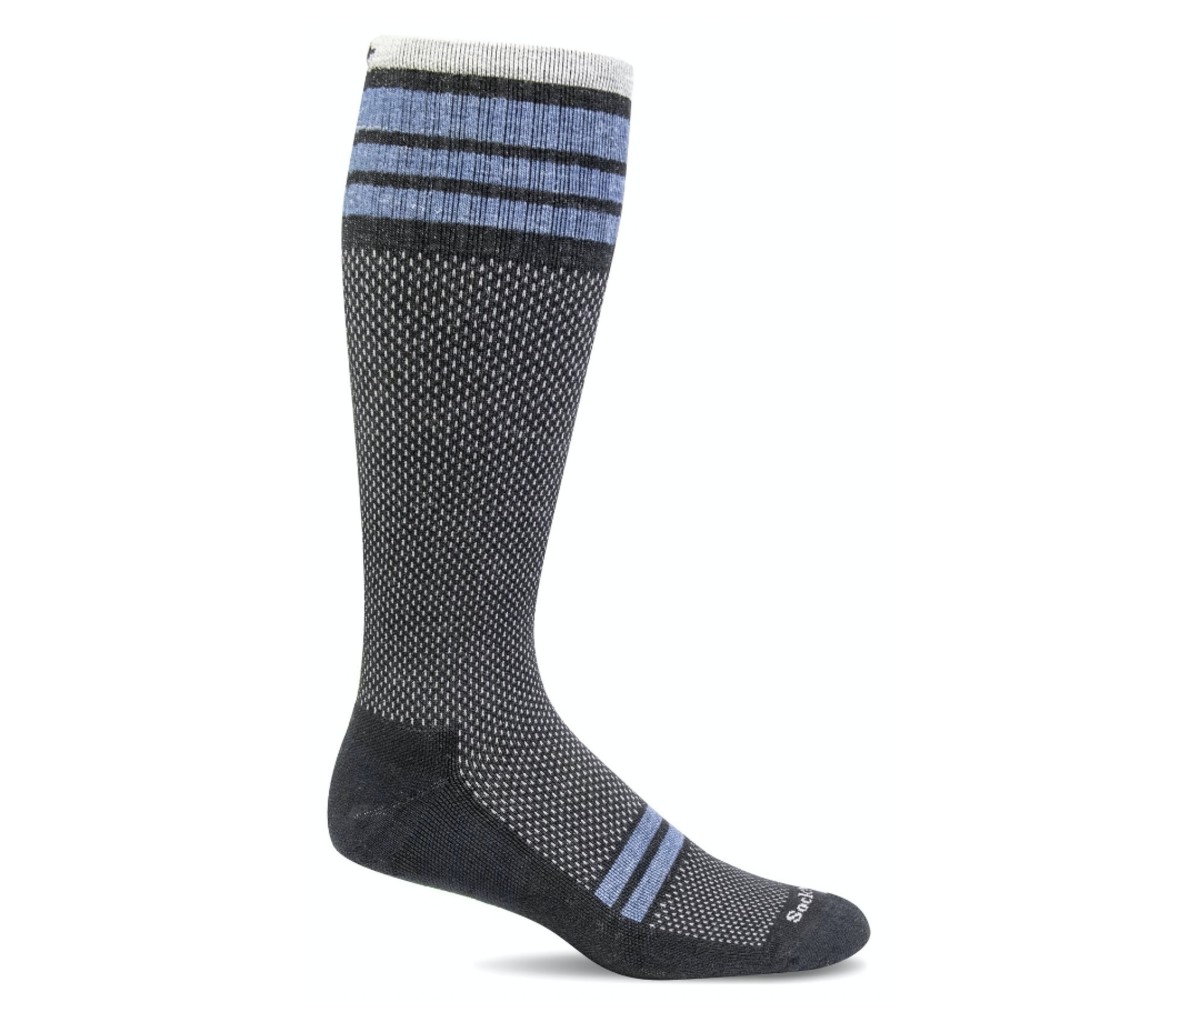 Over the Calf Merino Woool DRESS Sock with Cushion Sole 2 Pair 